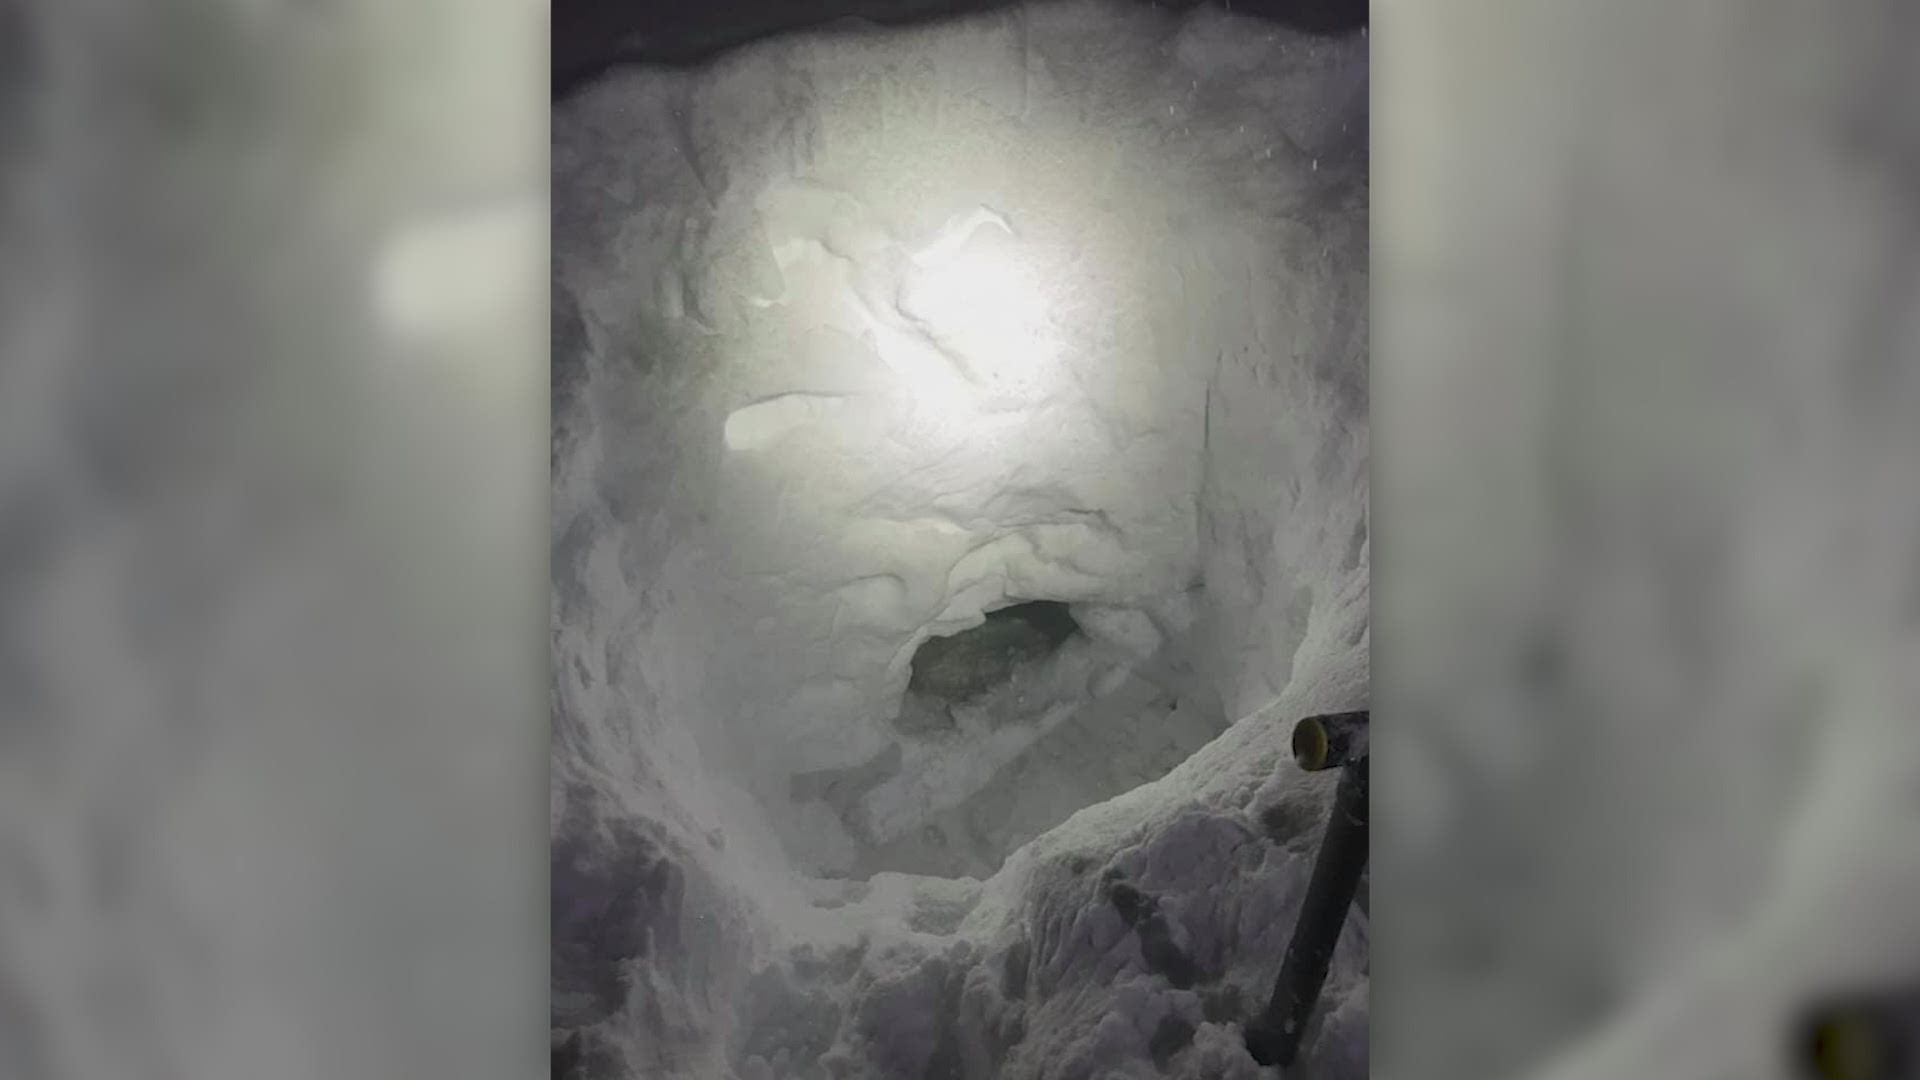 After he got lost, the 17-year-old teen dug a snow cave and hunkered down with food and water while waiting to be rescued.